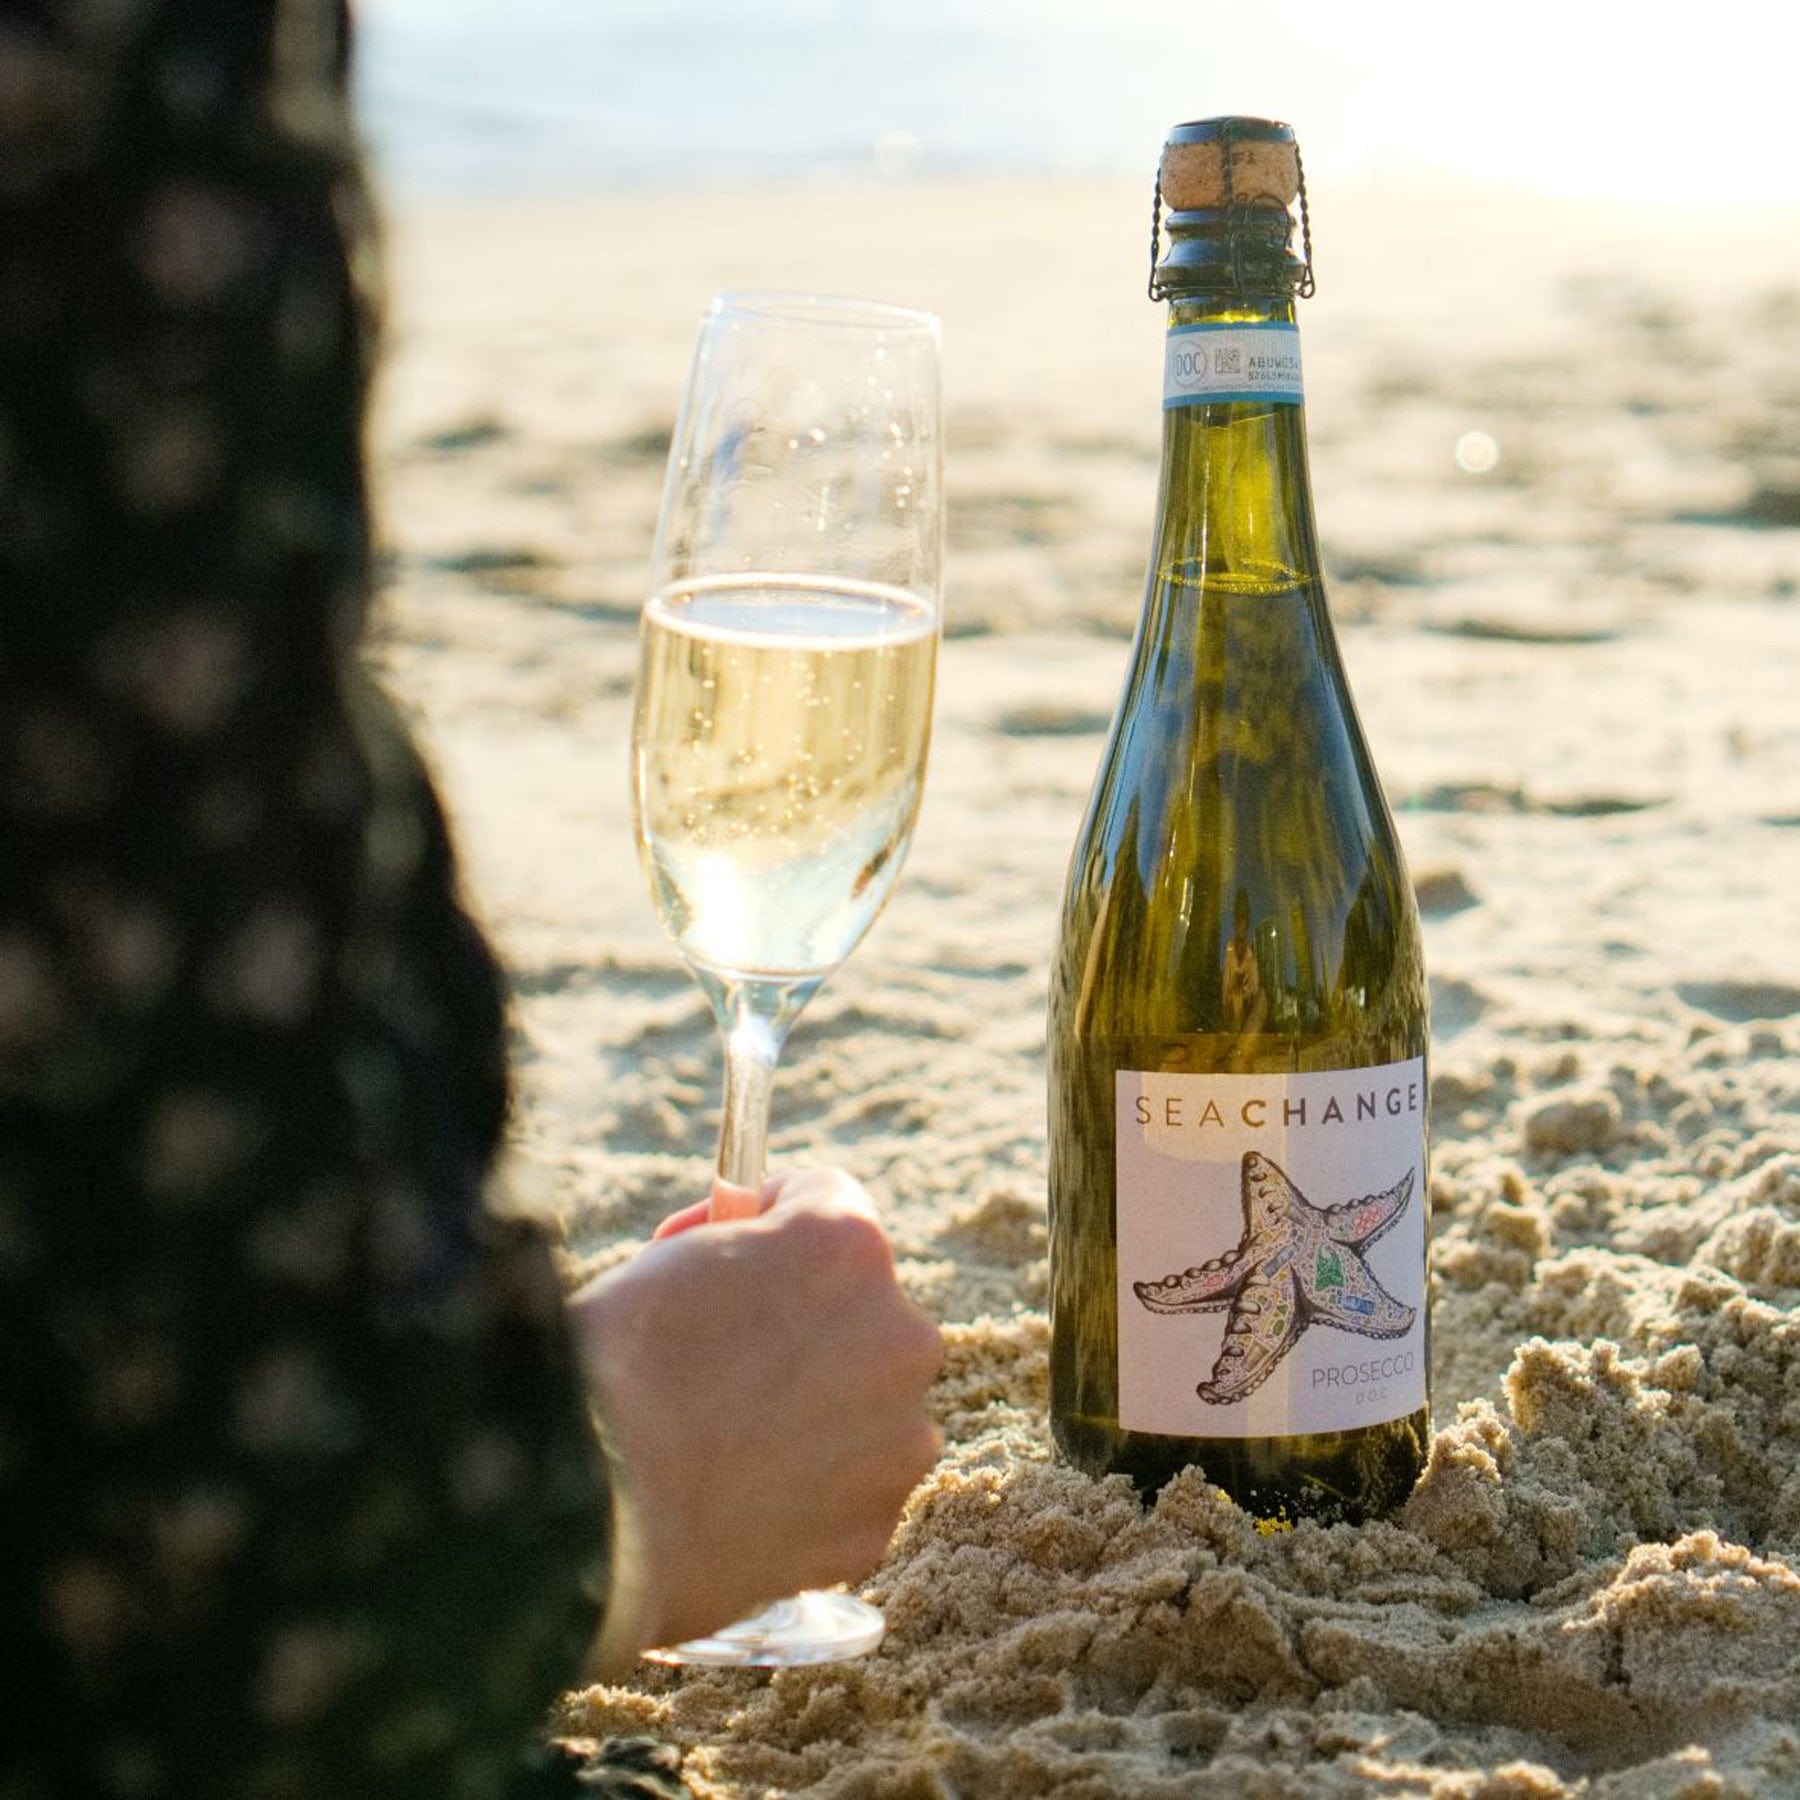 Close-up of champagne glass and bottle of Seachange Prosecco on sandy beach with person's hand, sunset lighting, celebratory beachside drink.